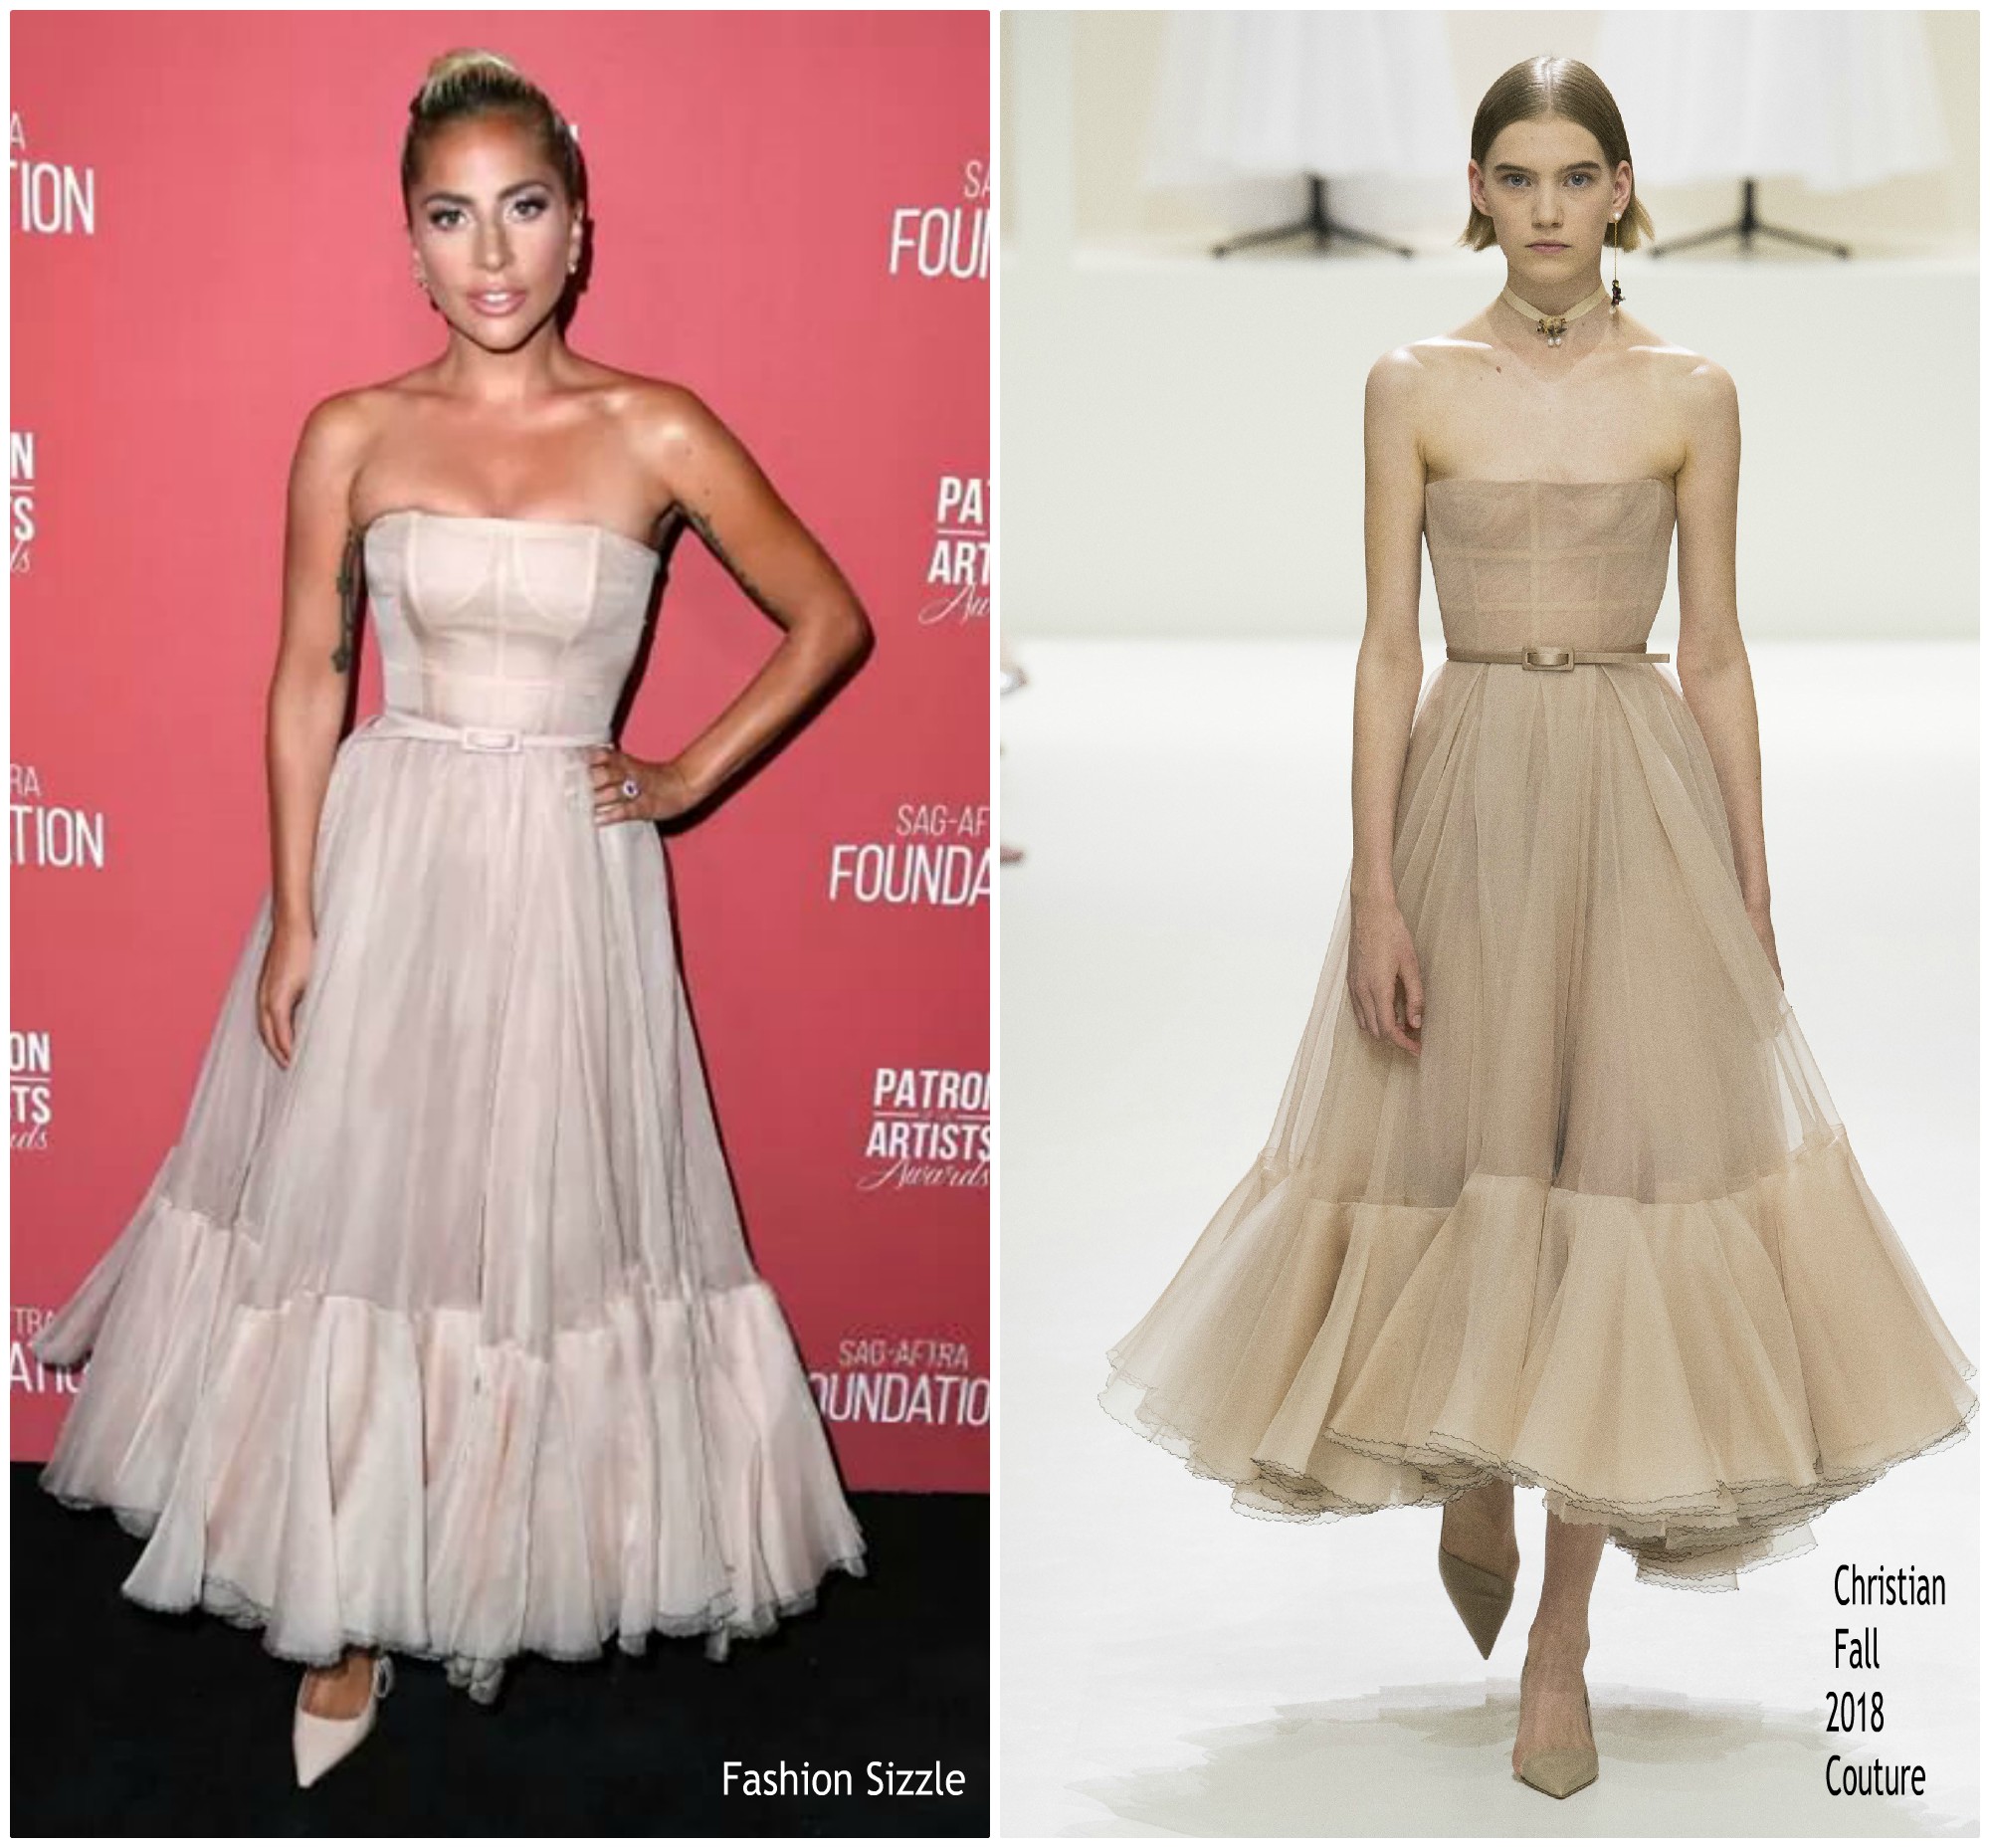 lady-gaga-in-christian-dior-haute-couture-sag-aftra-foundations-3rd-annual-patron-of-the-artists-awards